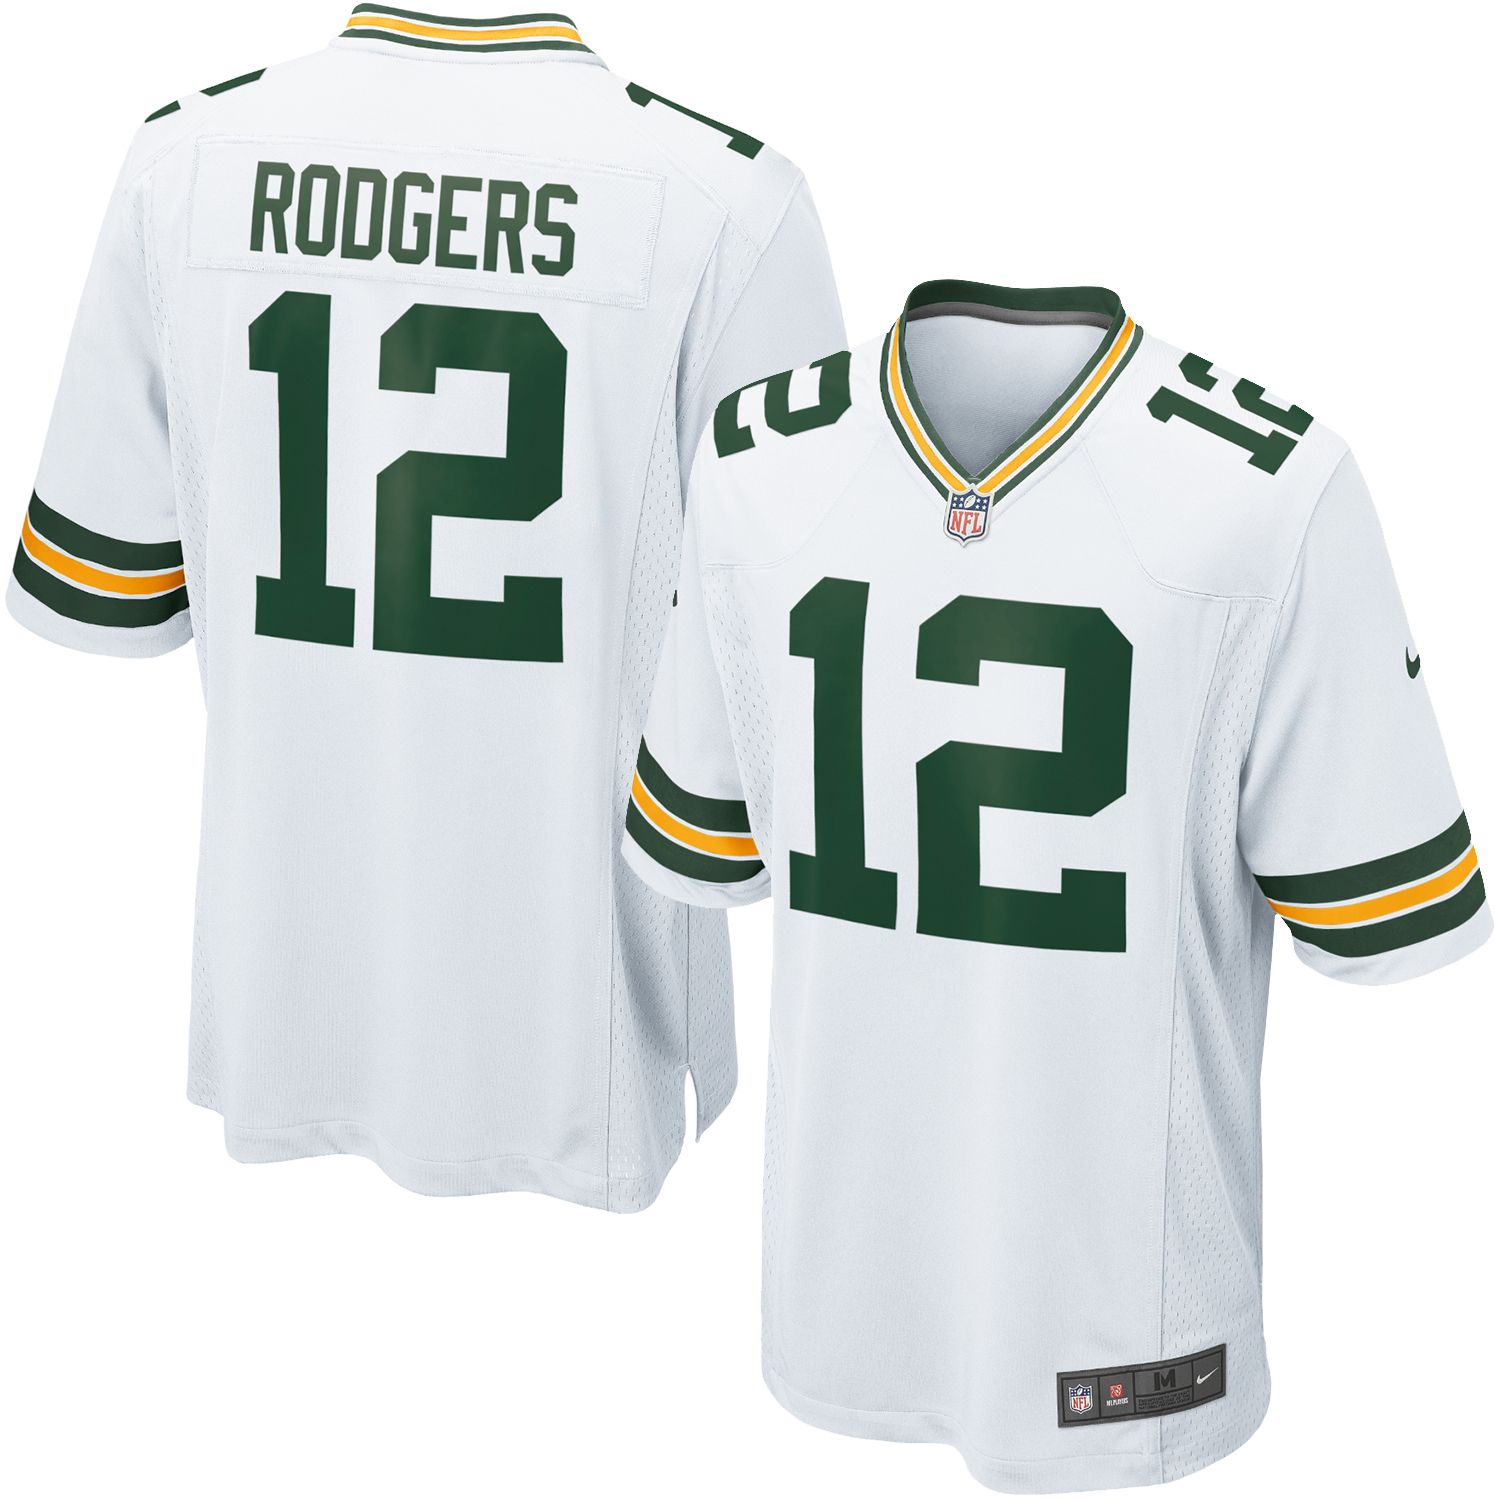 aaron rodgers jersey near me